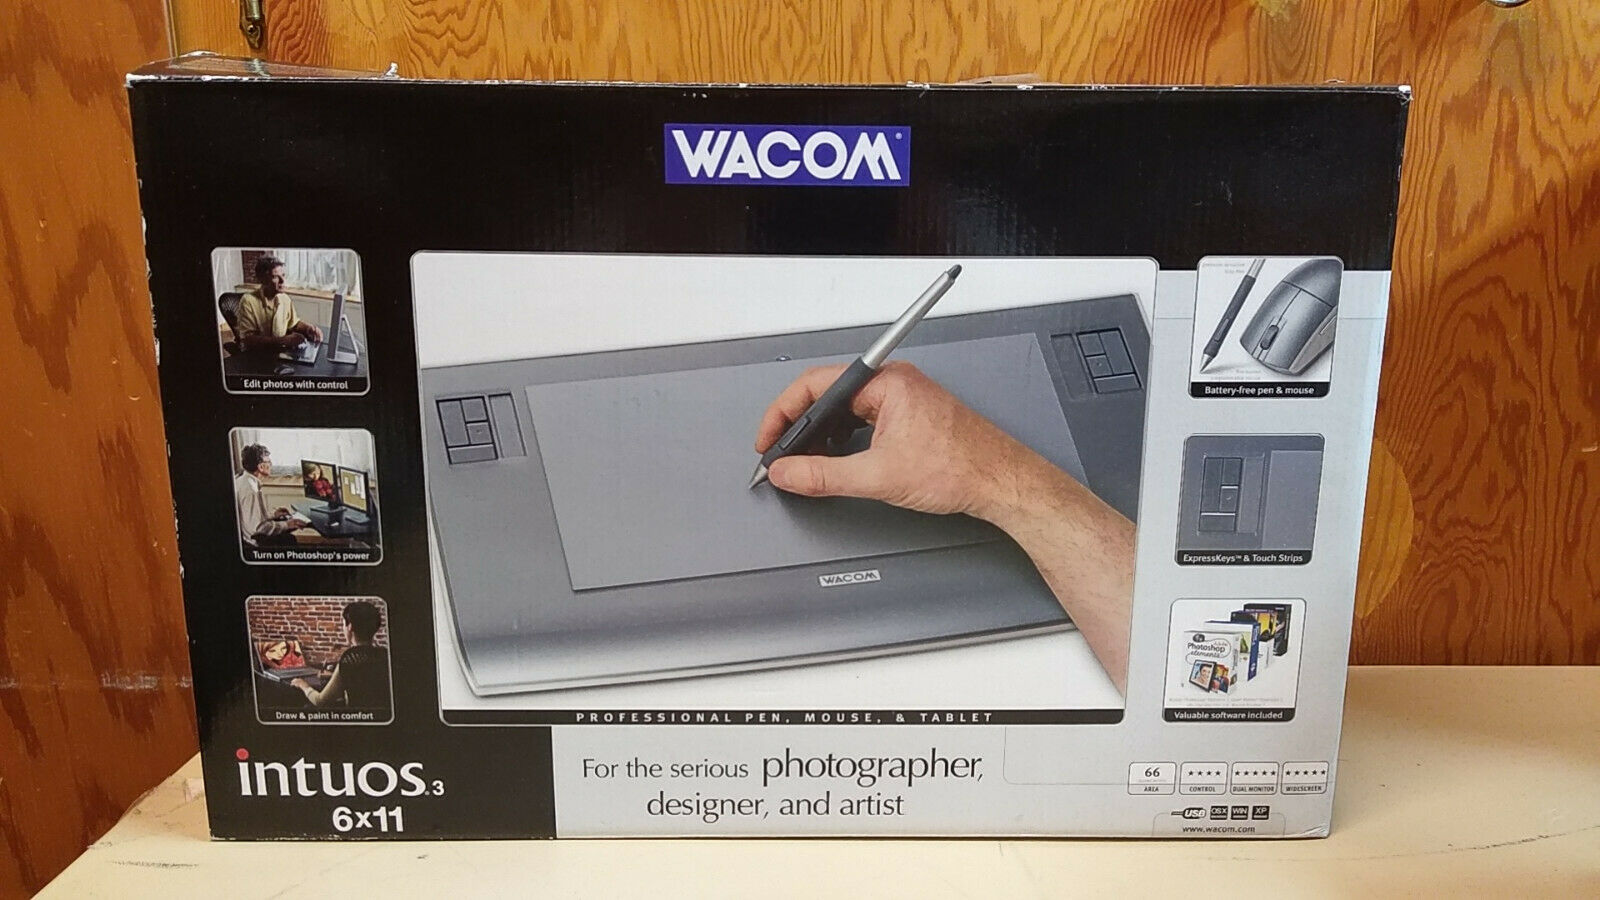 Wacom Intuos 3 6 X 11 Drawing Tablet Pad Pad Only